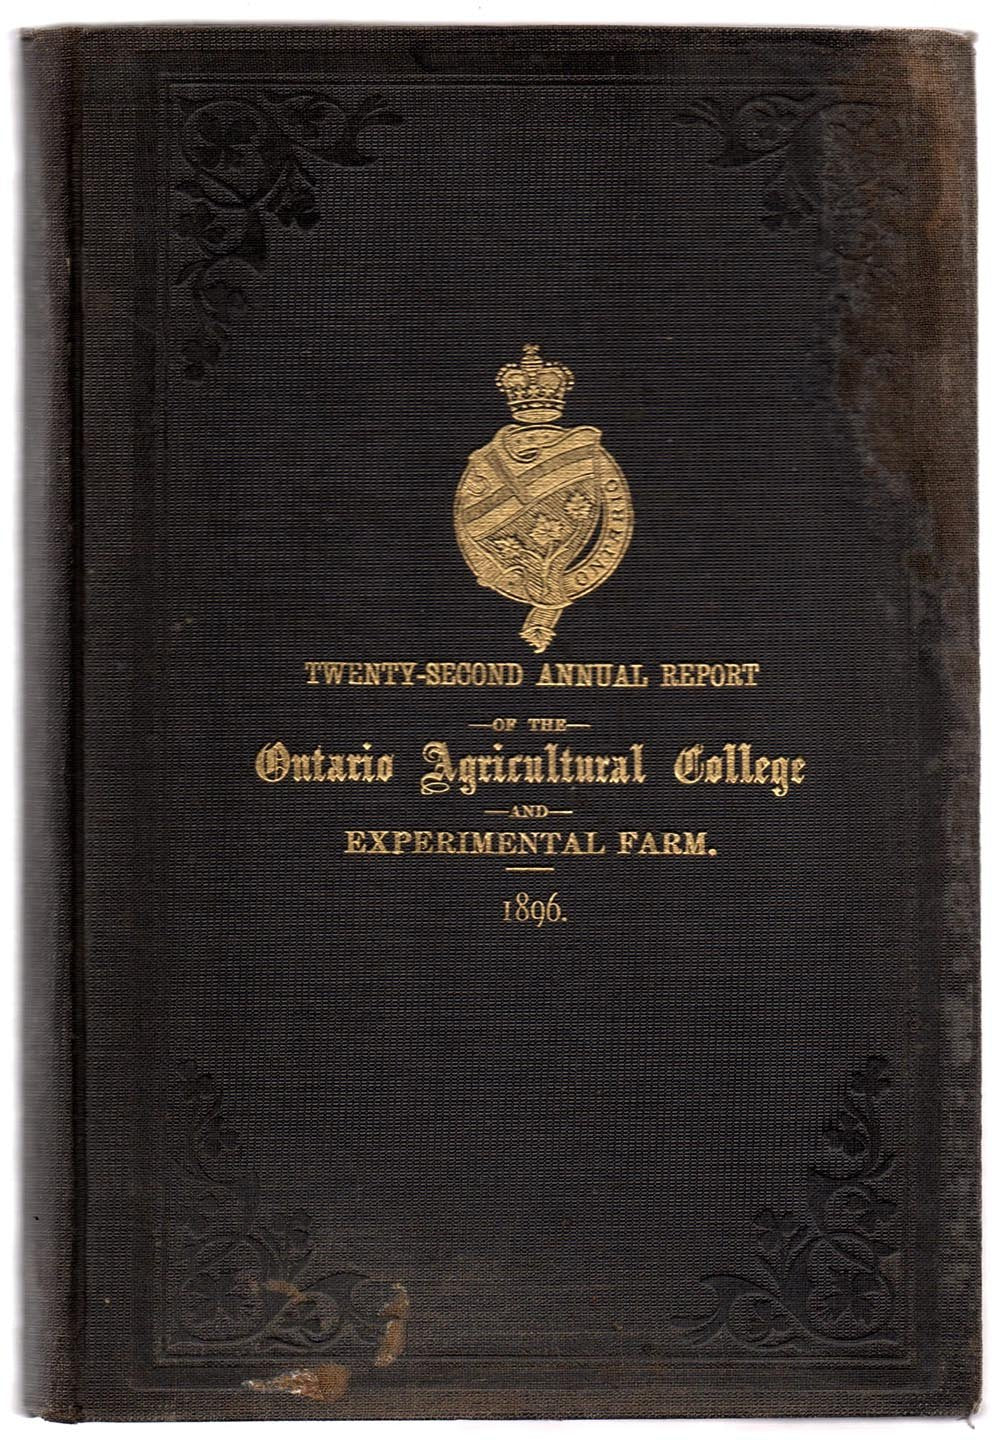 Twenty-second Annual Report of the Ontario Agricultural College and Experimental Farm; Eighteenth Annual Report of the Agricultural and Experimental Union 